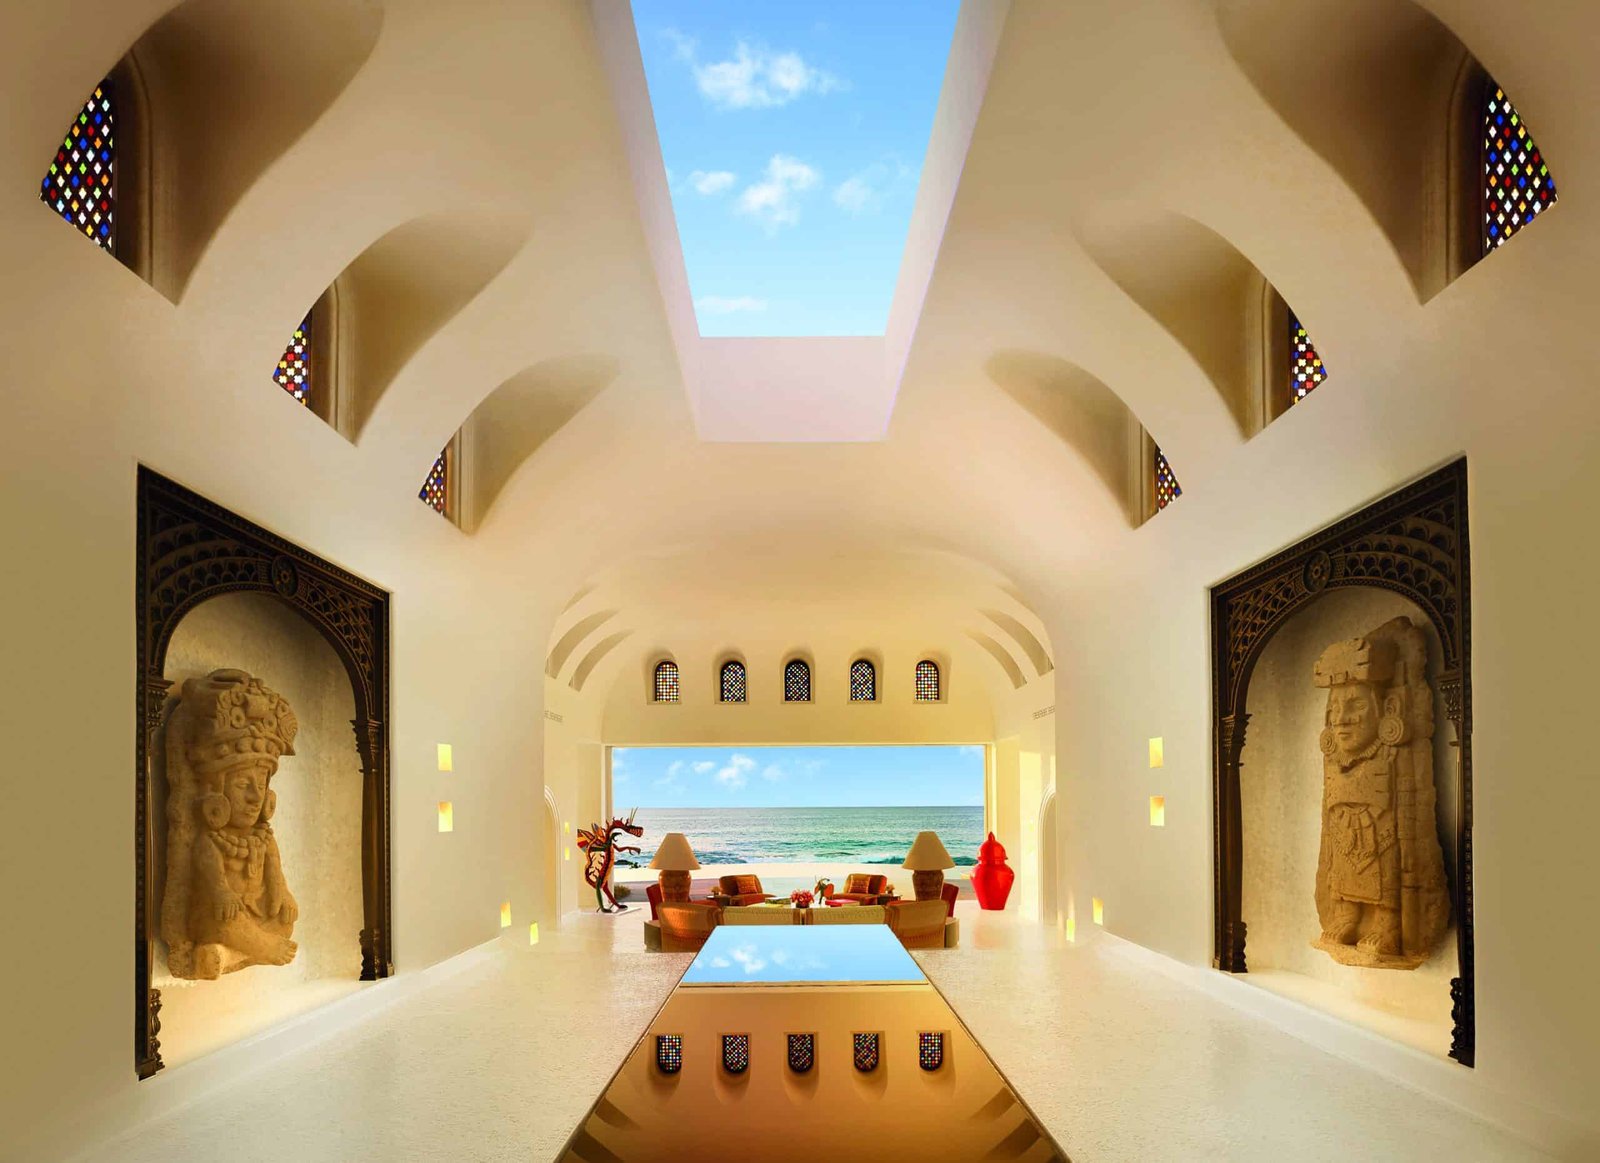 A room with arches and a panoramic view of the ocean, designed with a personal touch.